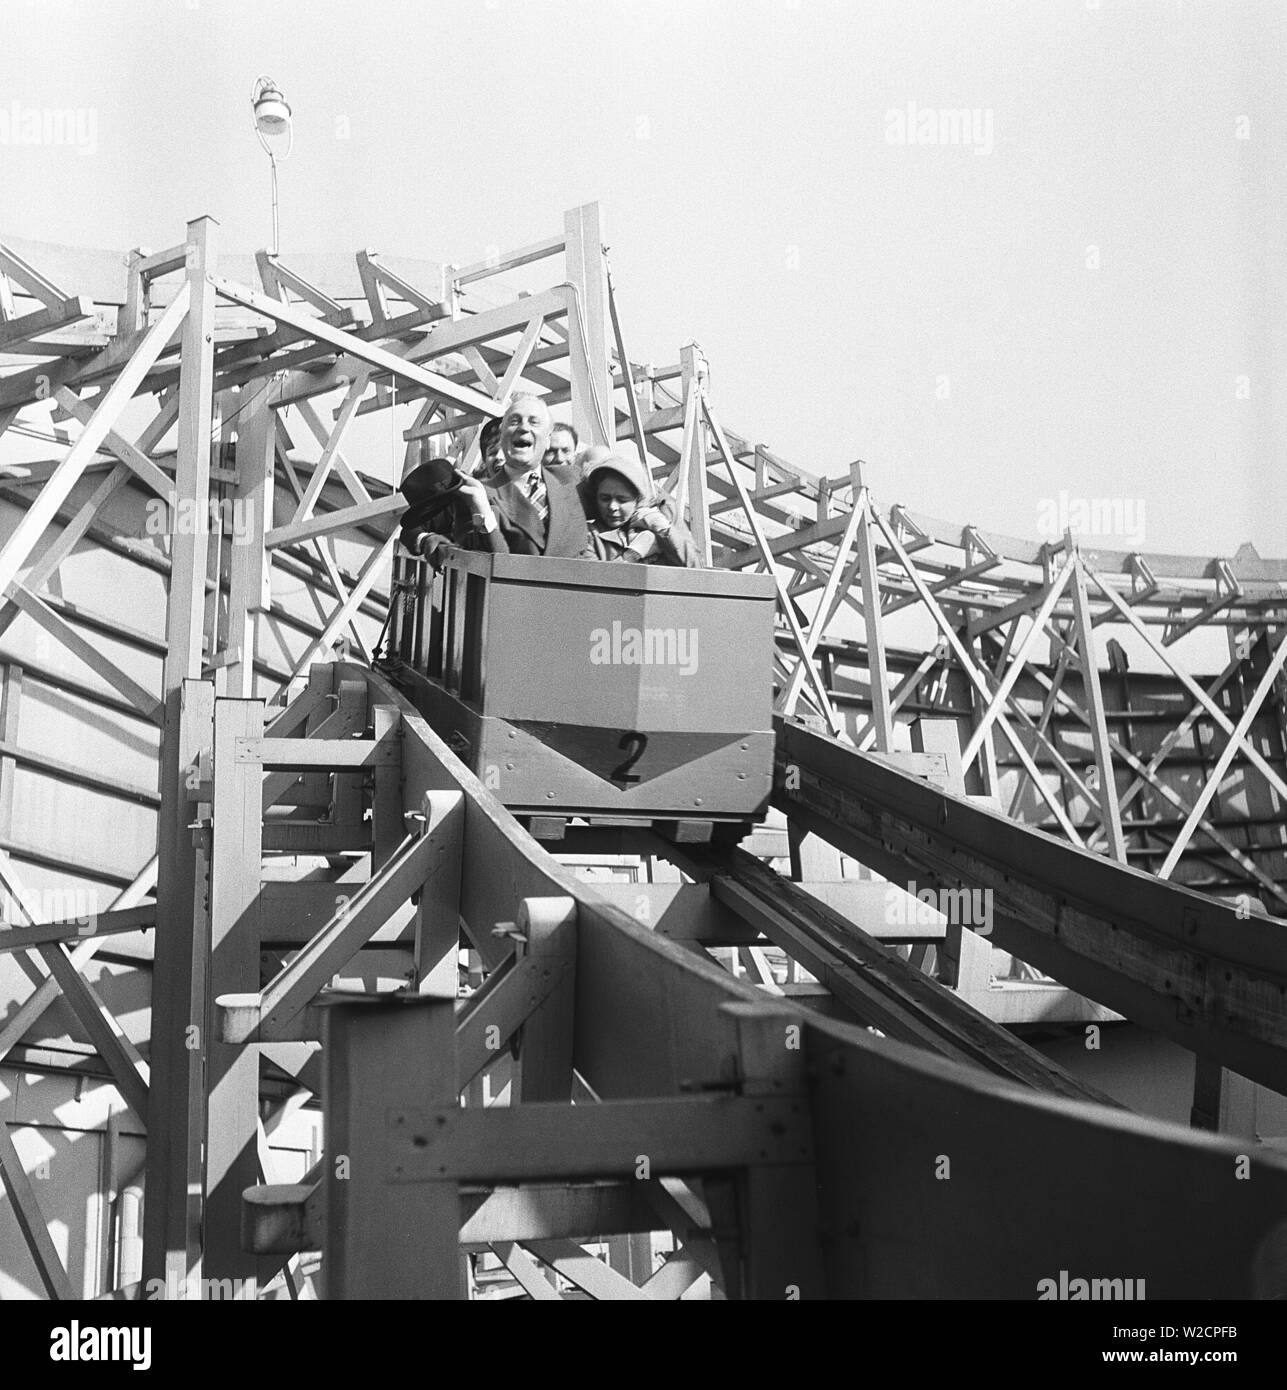 Amusement park in the 1950s. No matter old or young, riding in the rollercoaster makes you happy. Pictured a group of elderly people riding in the rollercoaster. Sweden 1950. Kristoffersson ref AY57-9 Stock Photo